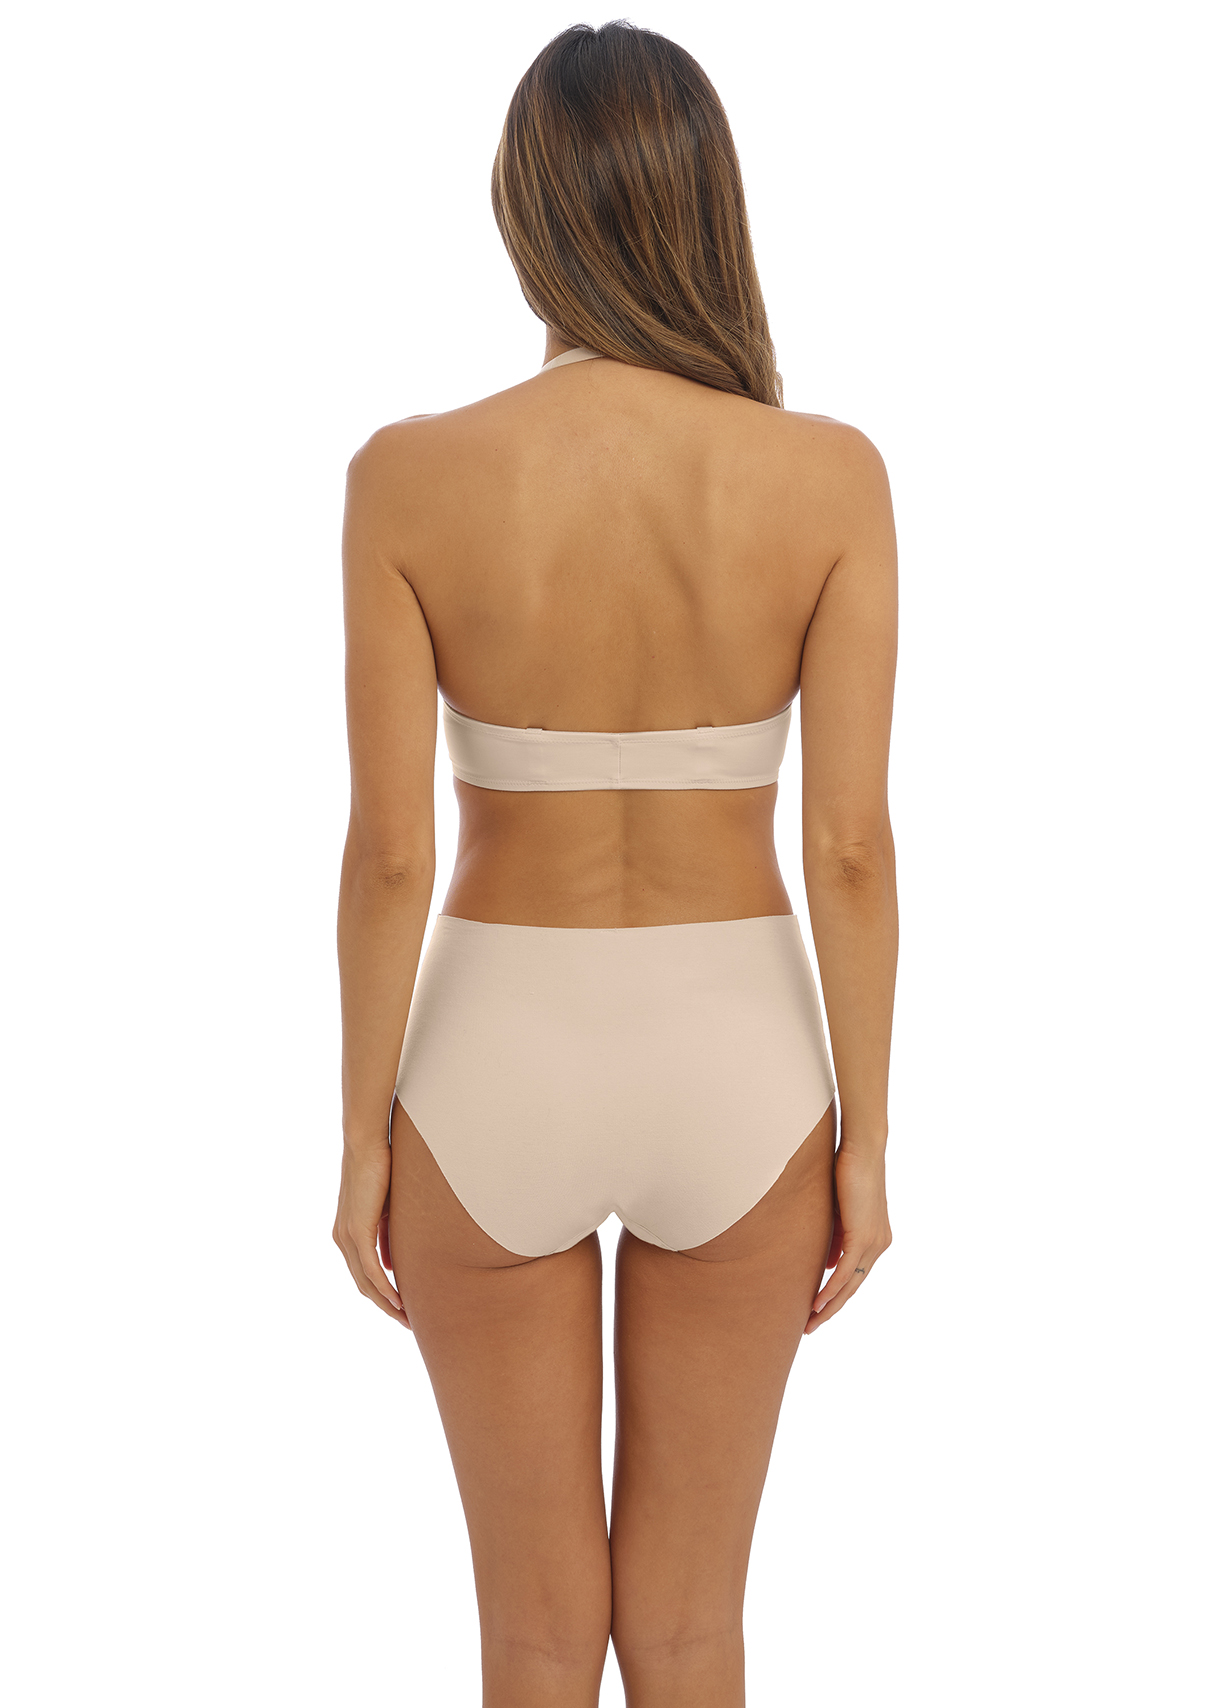 Accord Frappe Front Fastener Bra from Wacoal